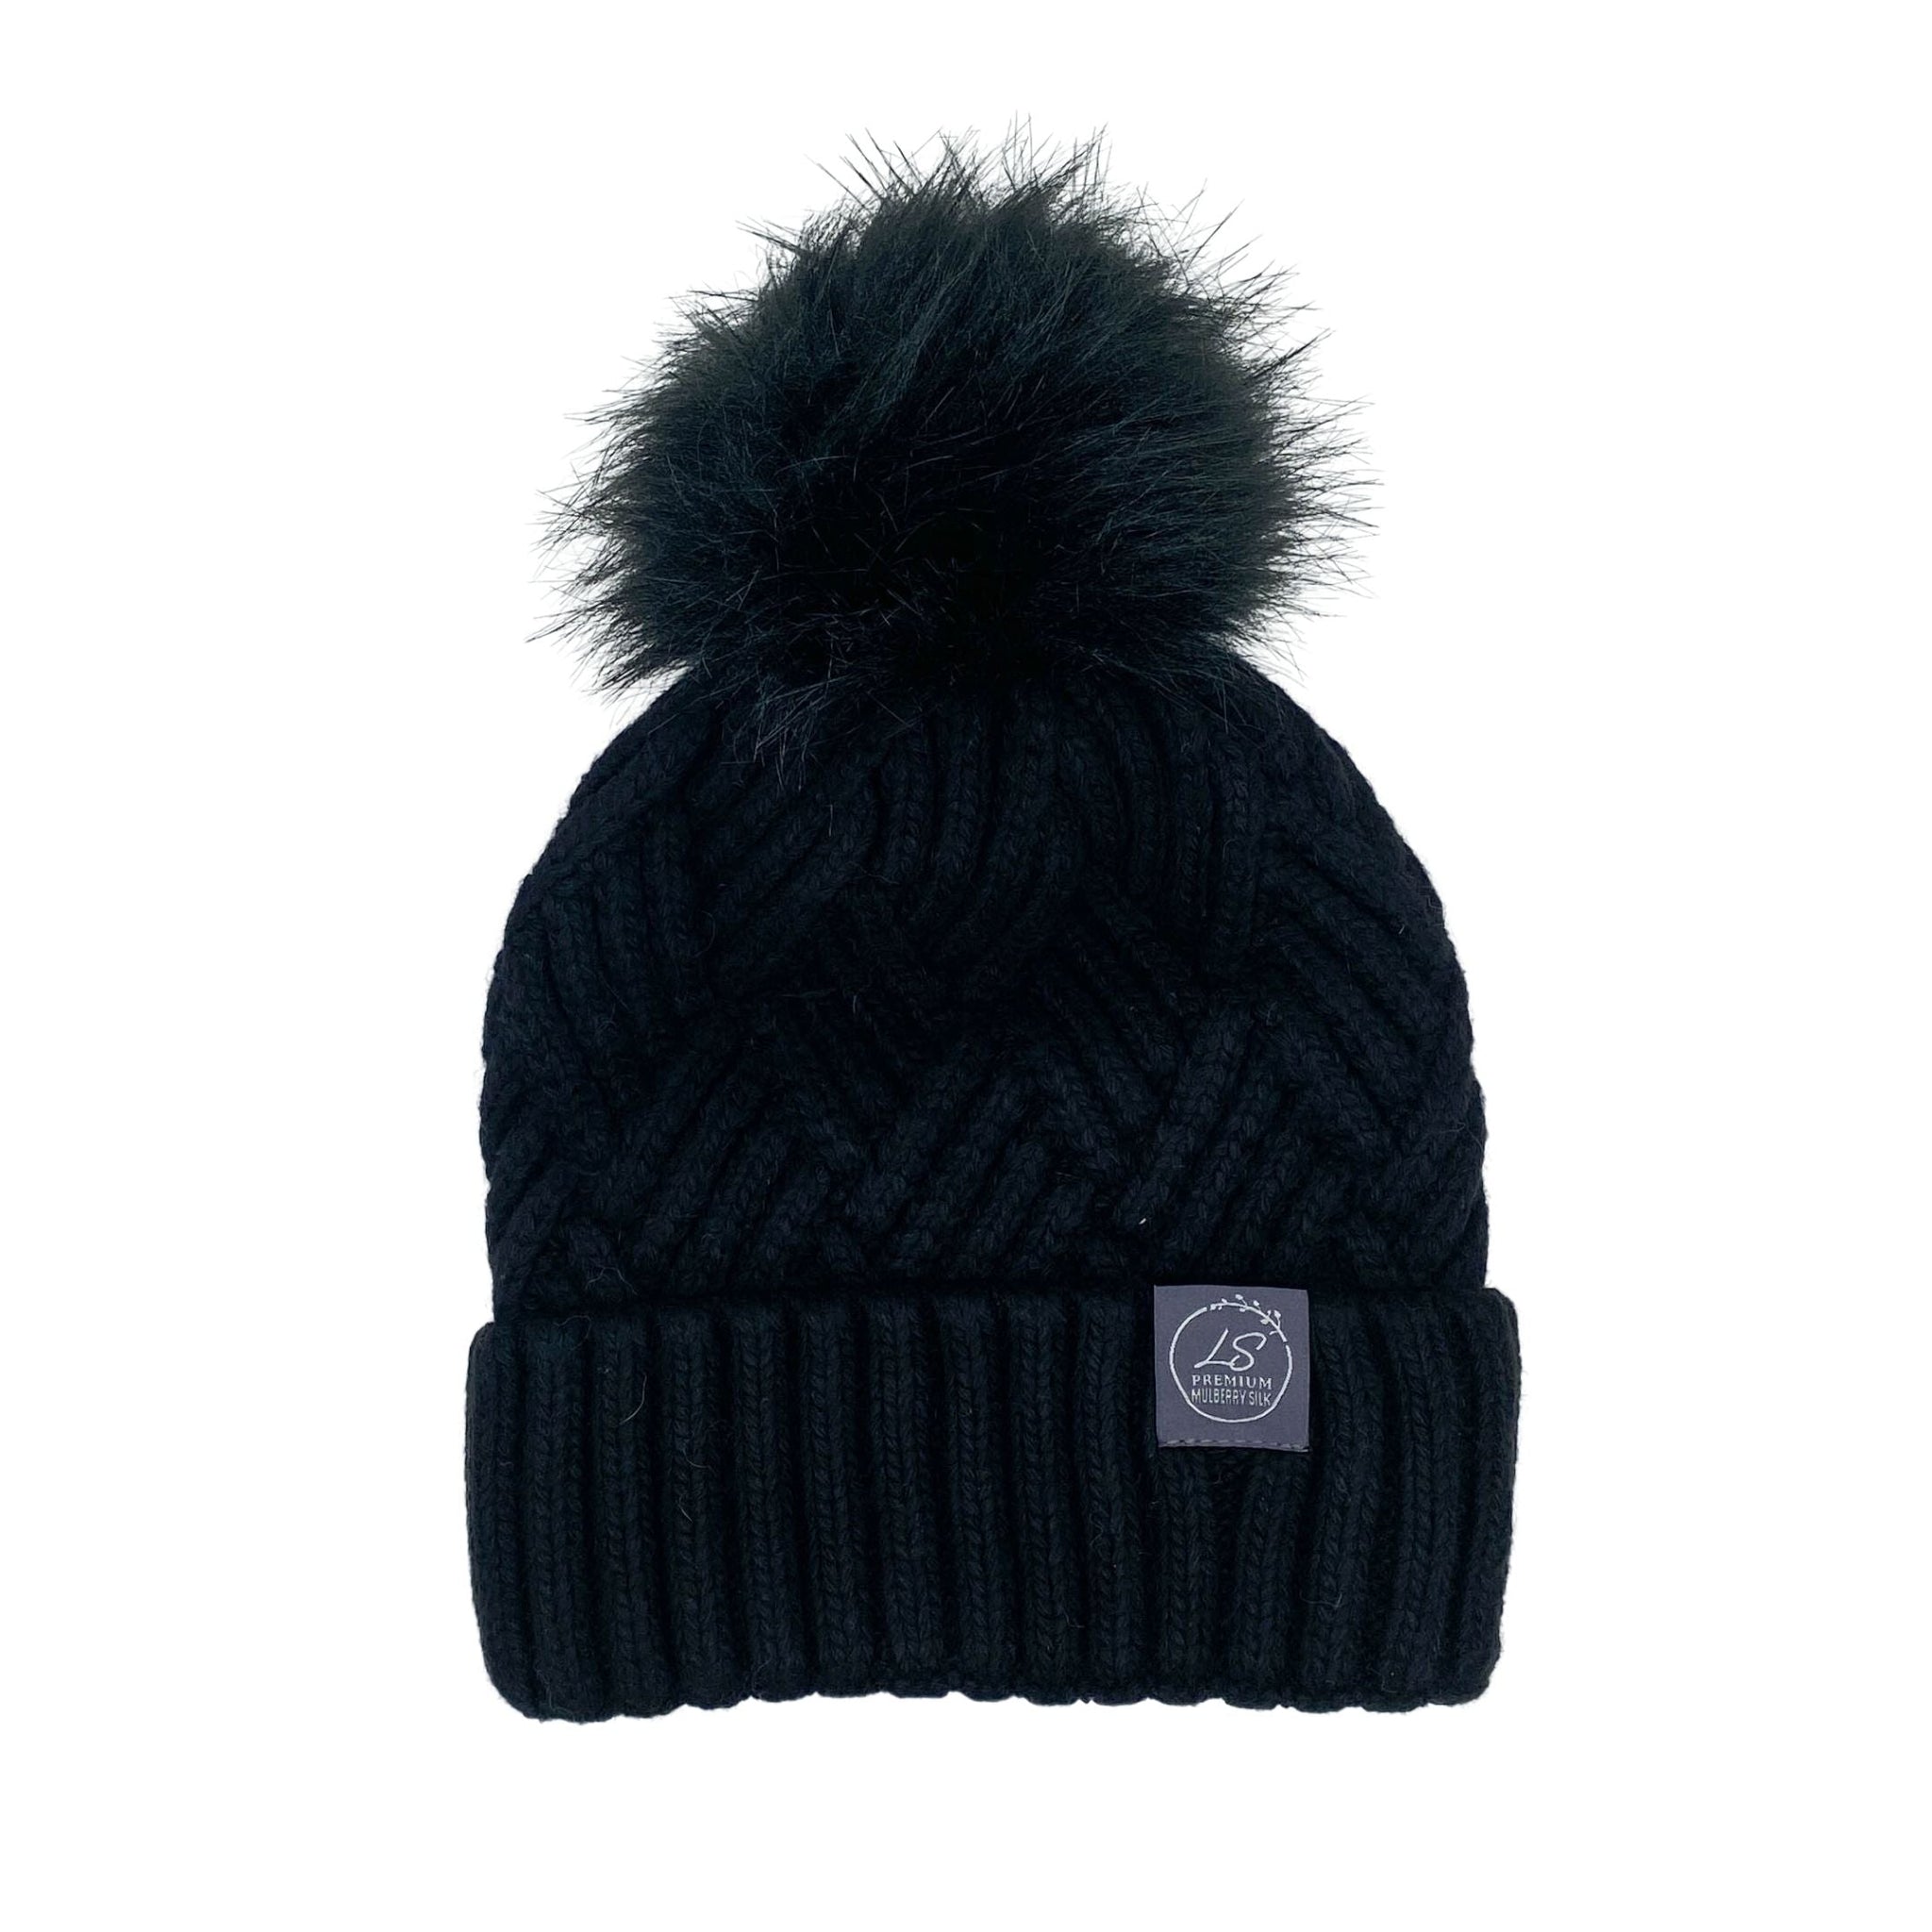 Silk Lined Cashmere Beanie Hat With Removable Pom Pom Black Auckland NZ